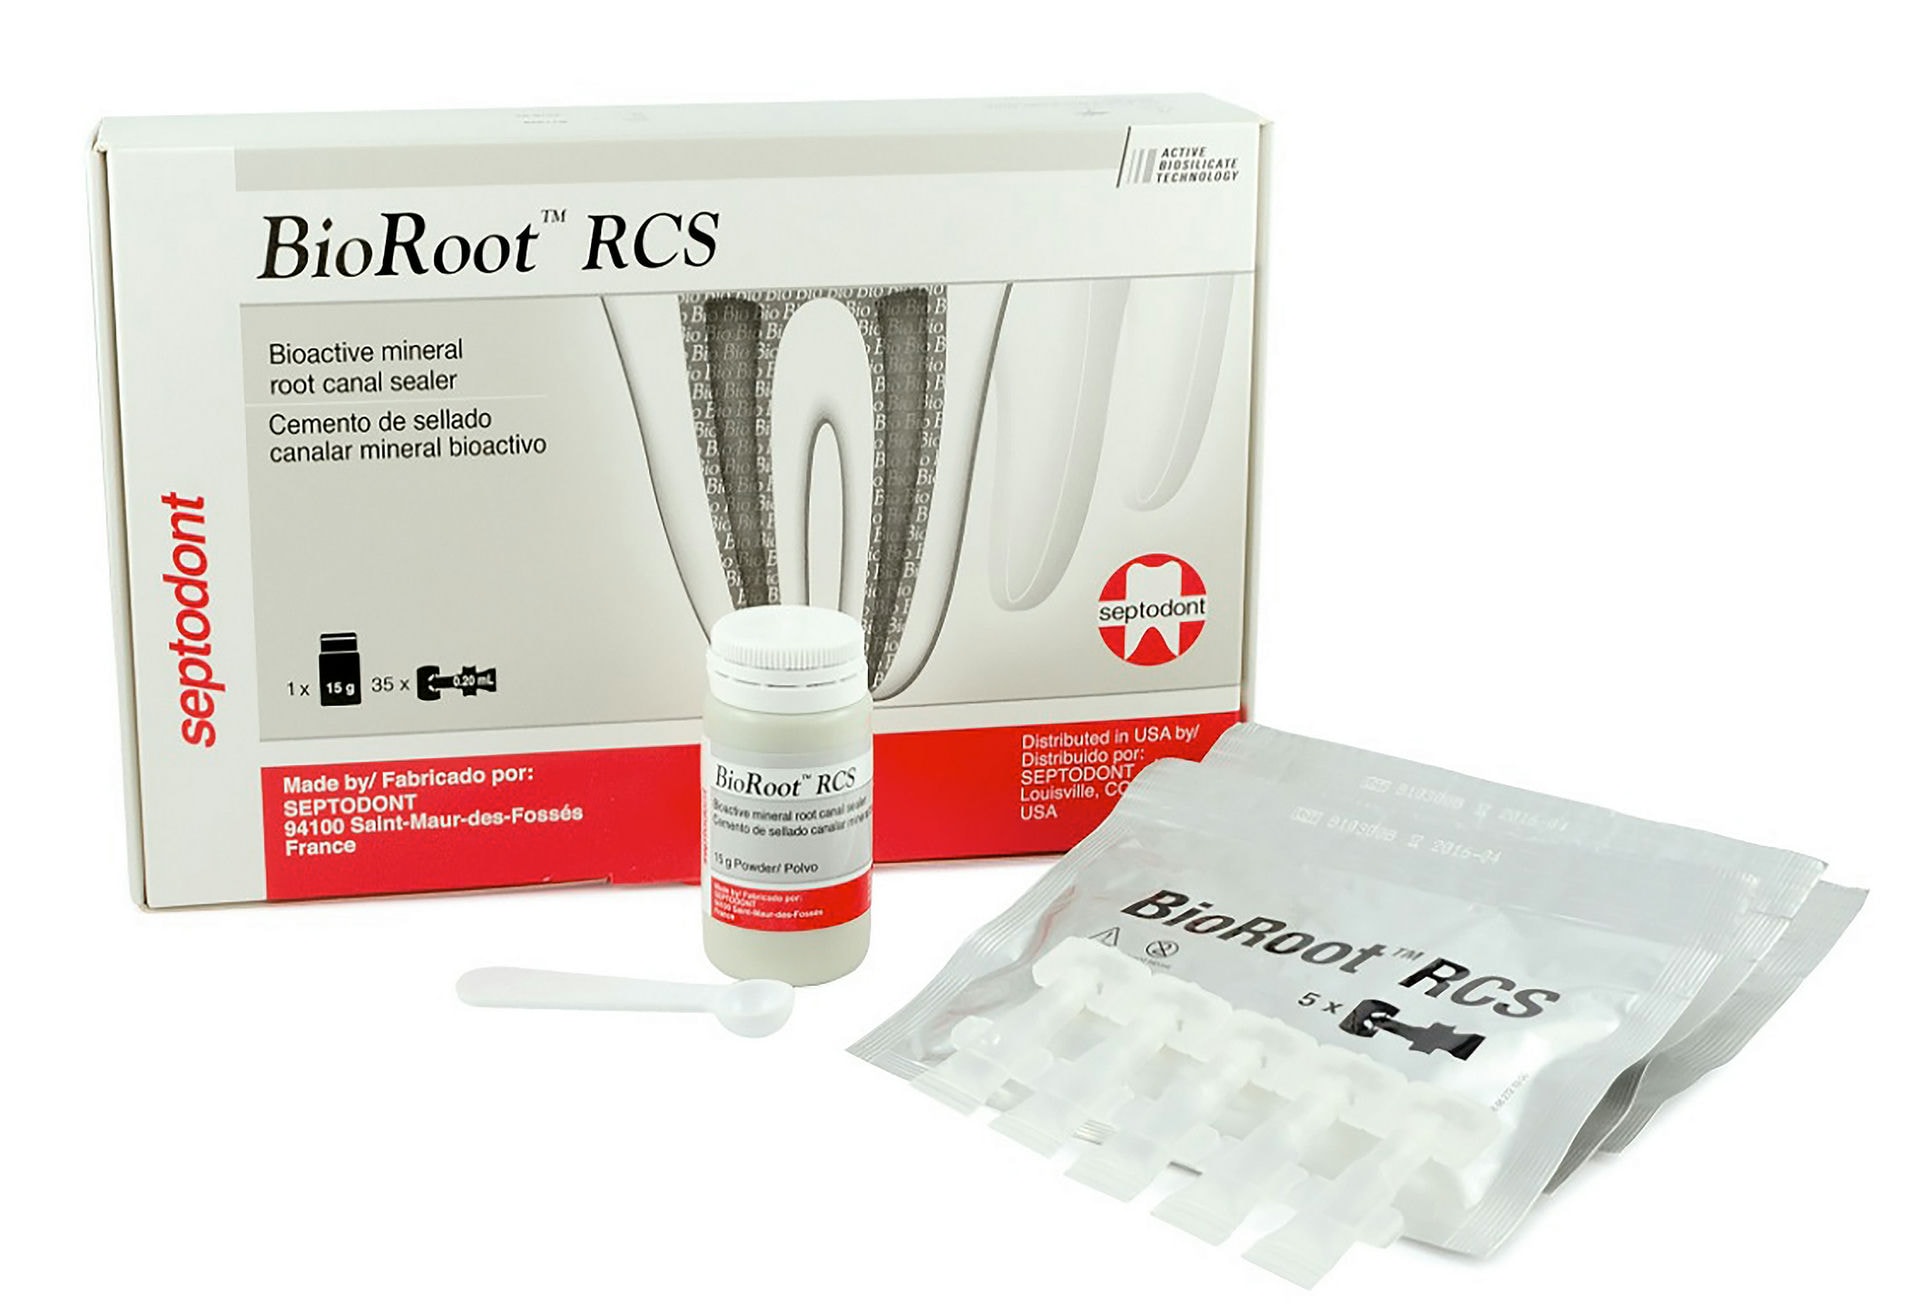 BioRoot RCS from Septodont. Bioactive mineral root canal sealer.